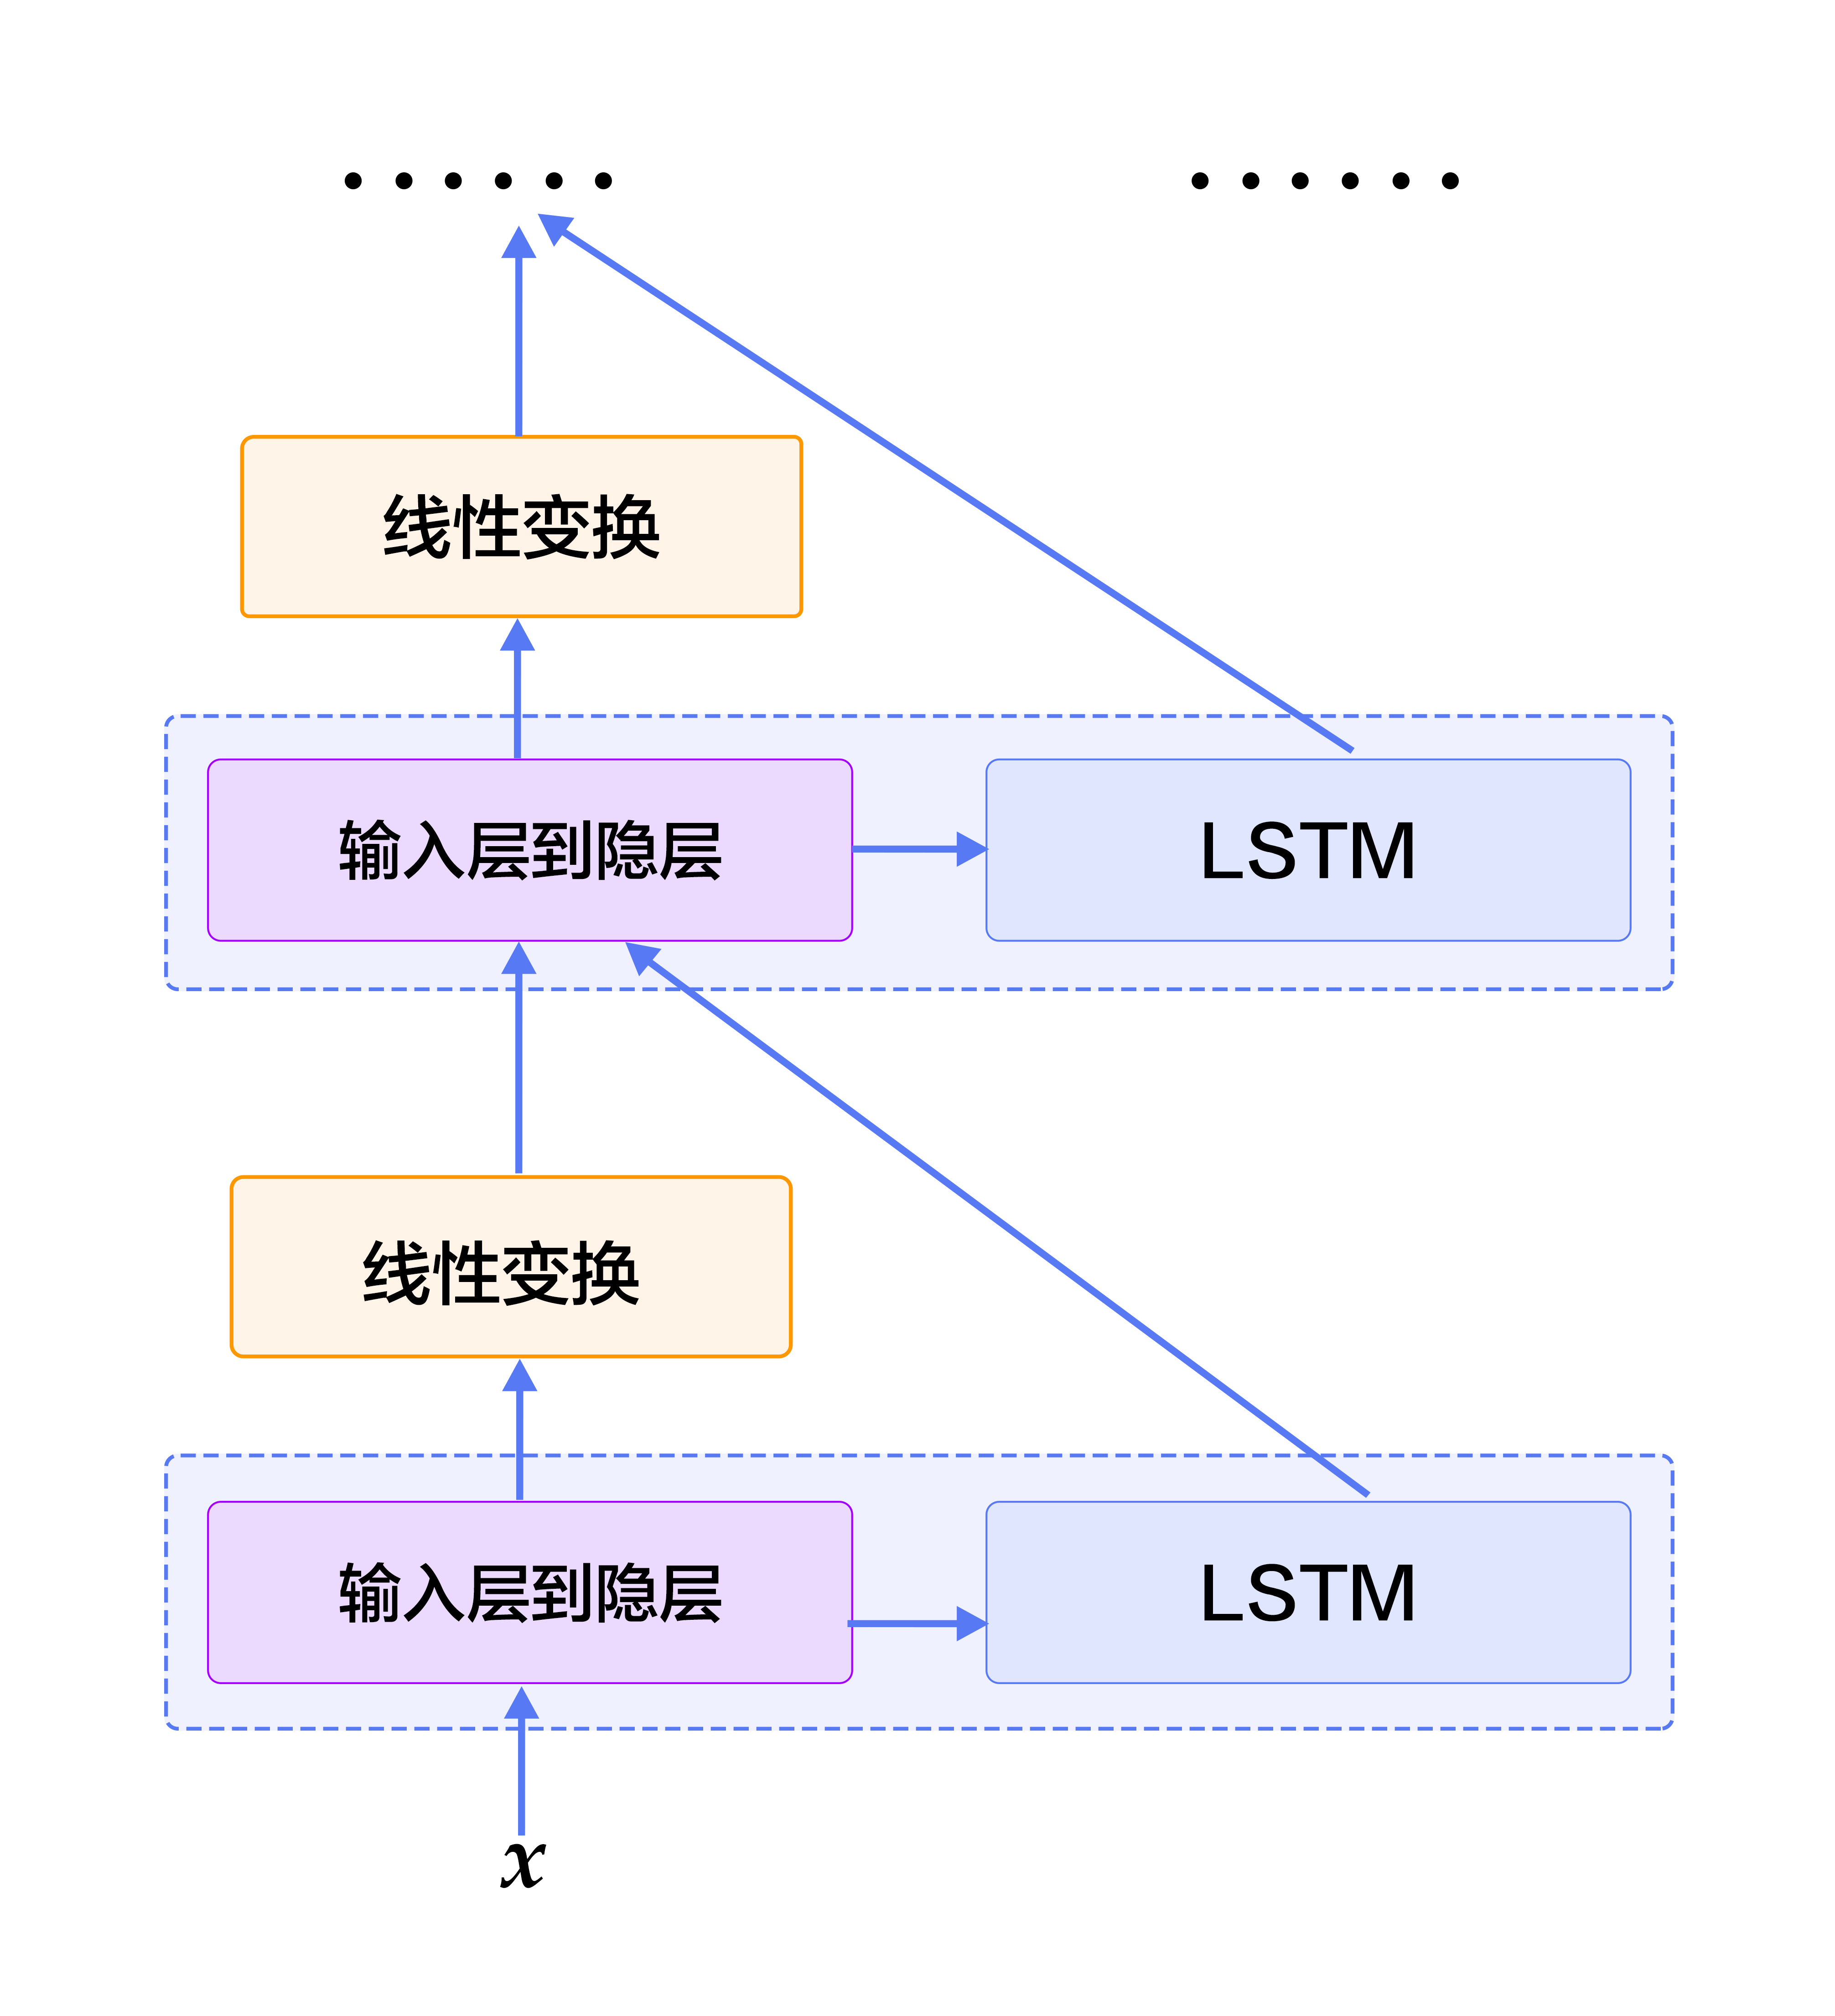 source/beginners_guide/basics/label_semantic_roles/image/stacked_lstm.png